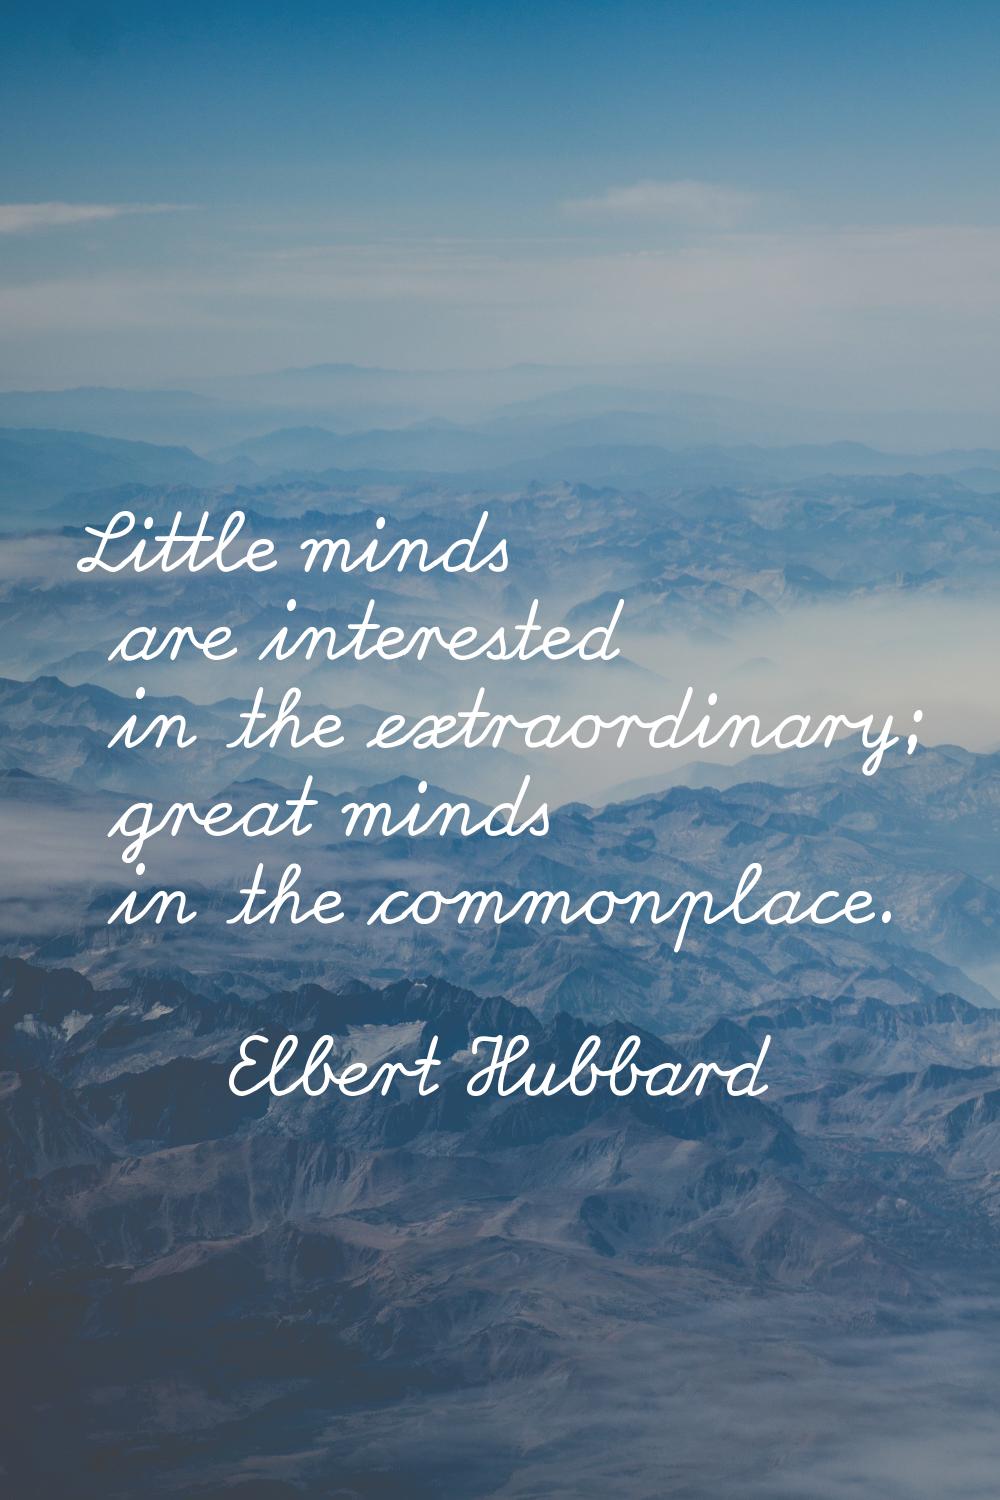 Little minds are interested in the extraordinary; great minds in the commonplace.